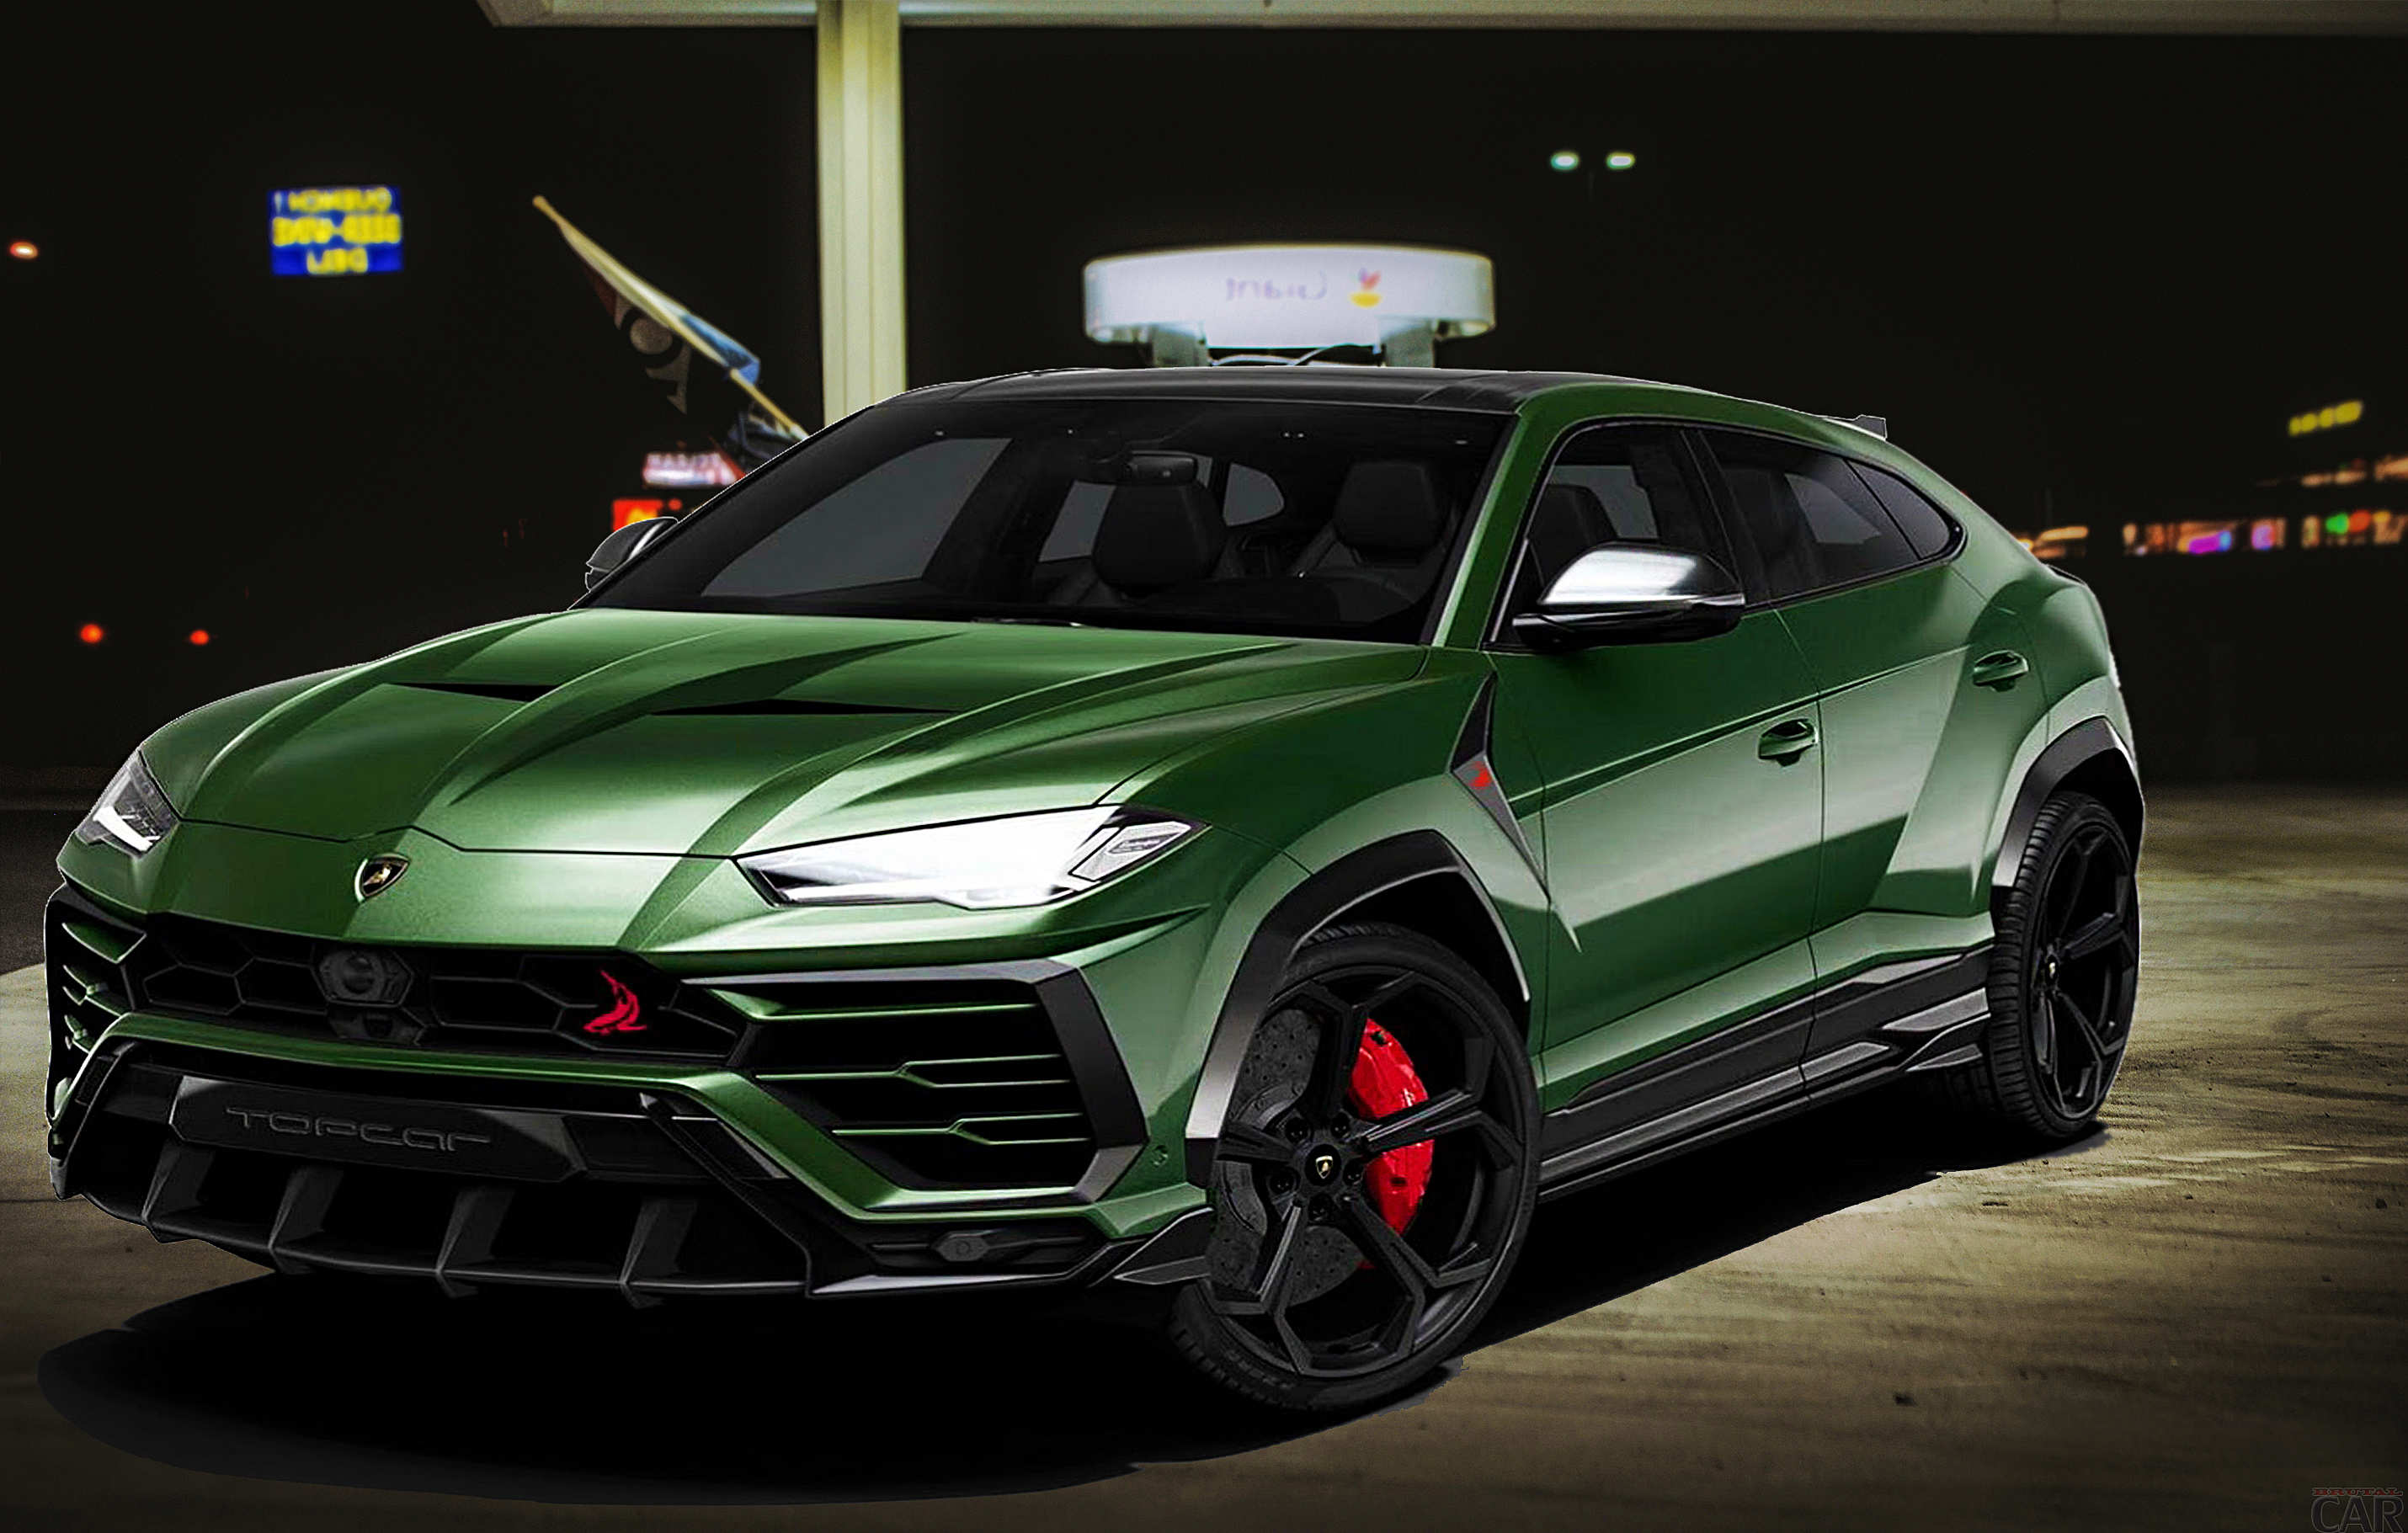 Lamborghini Urus Wallpapers Hd Download For Free Watch For Free The Best Hd Photos Of Cool Cars